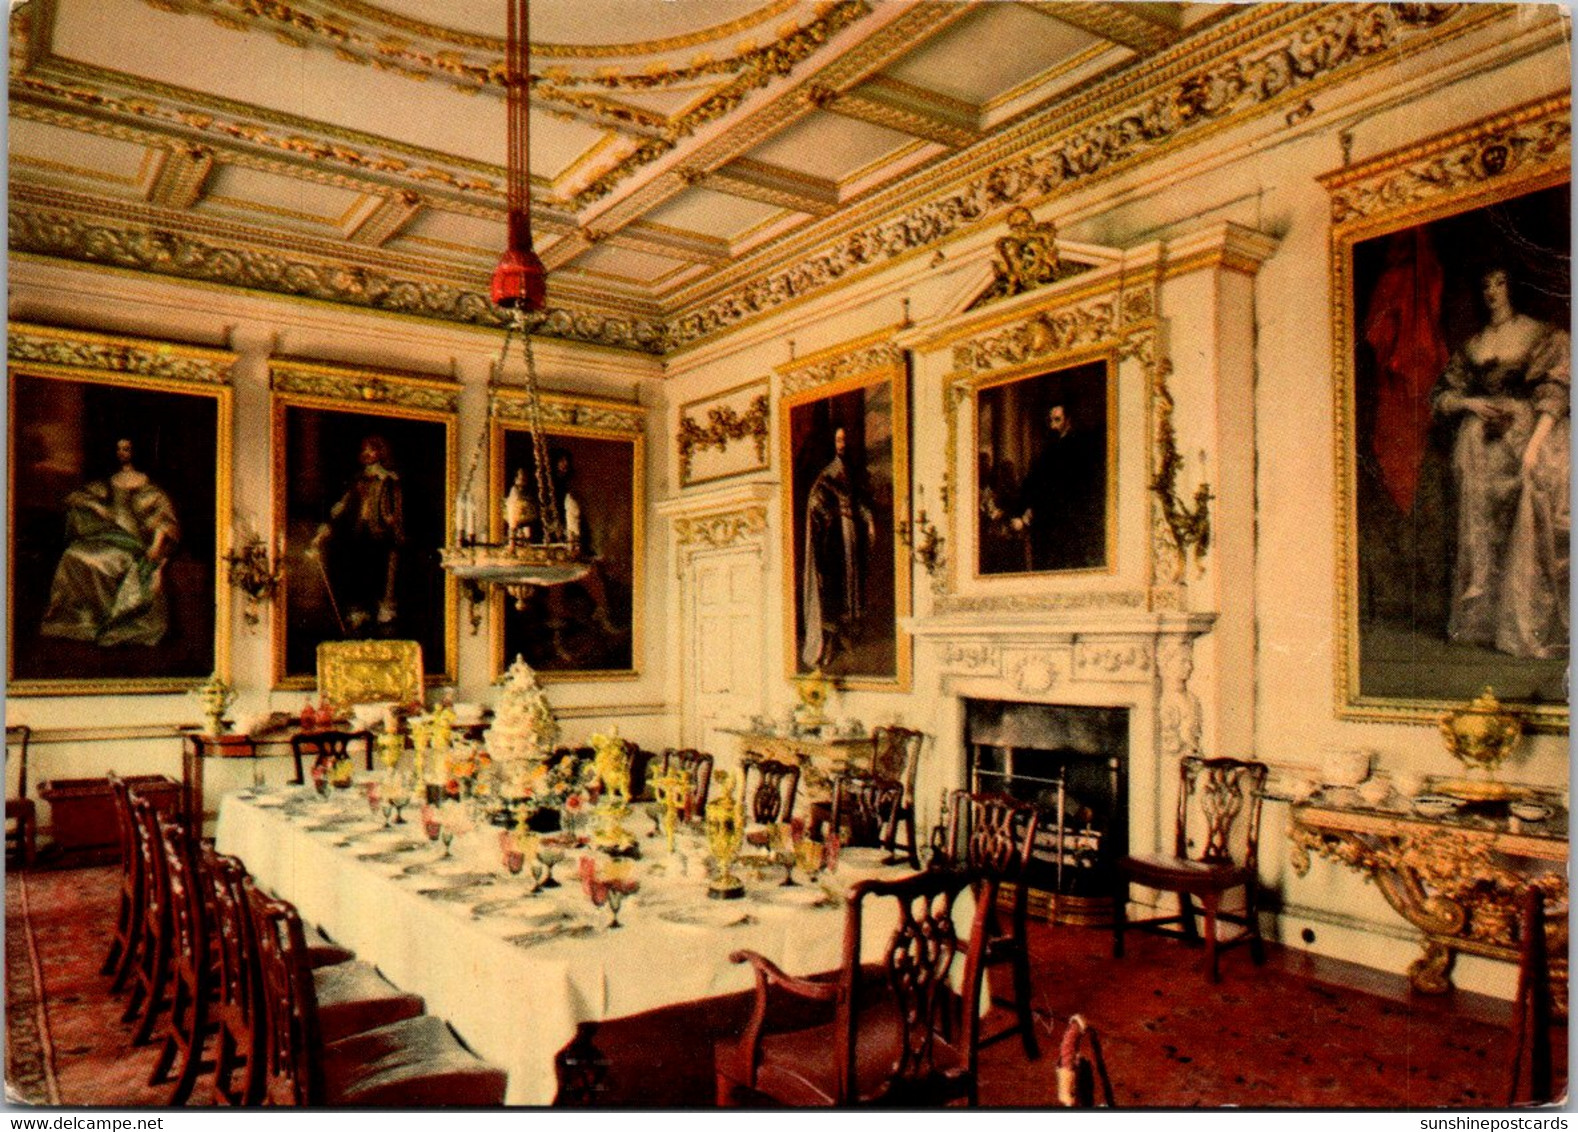 England Bedfordshire Woburn Abbey The State Dining Room - Bedford